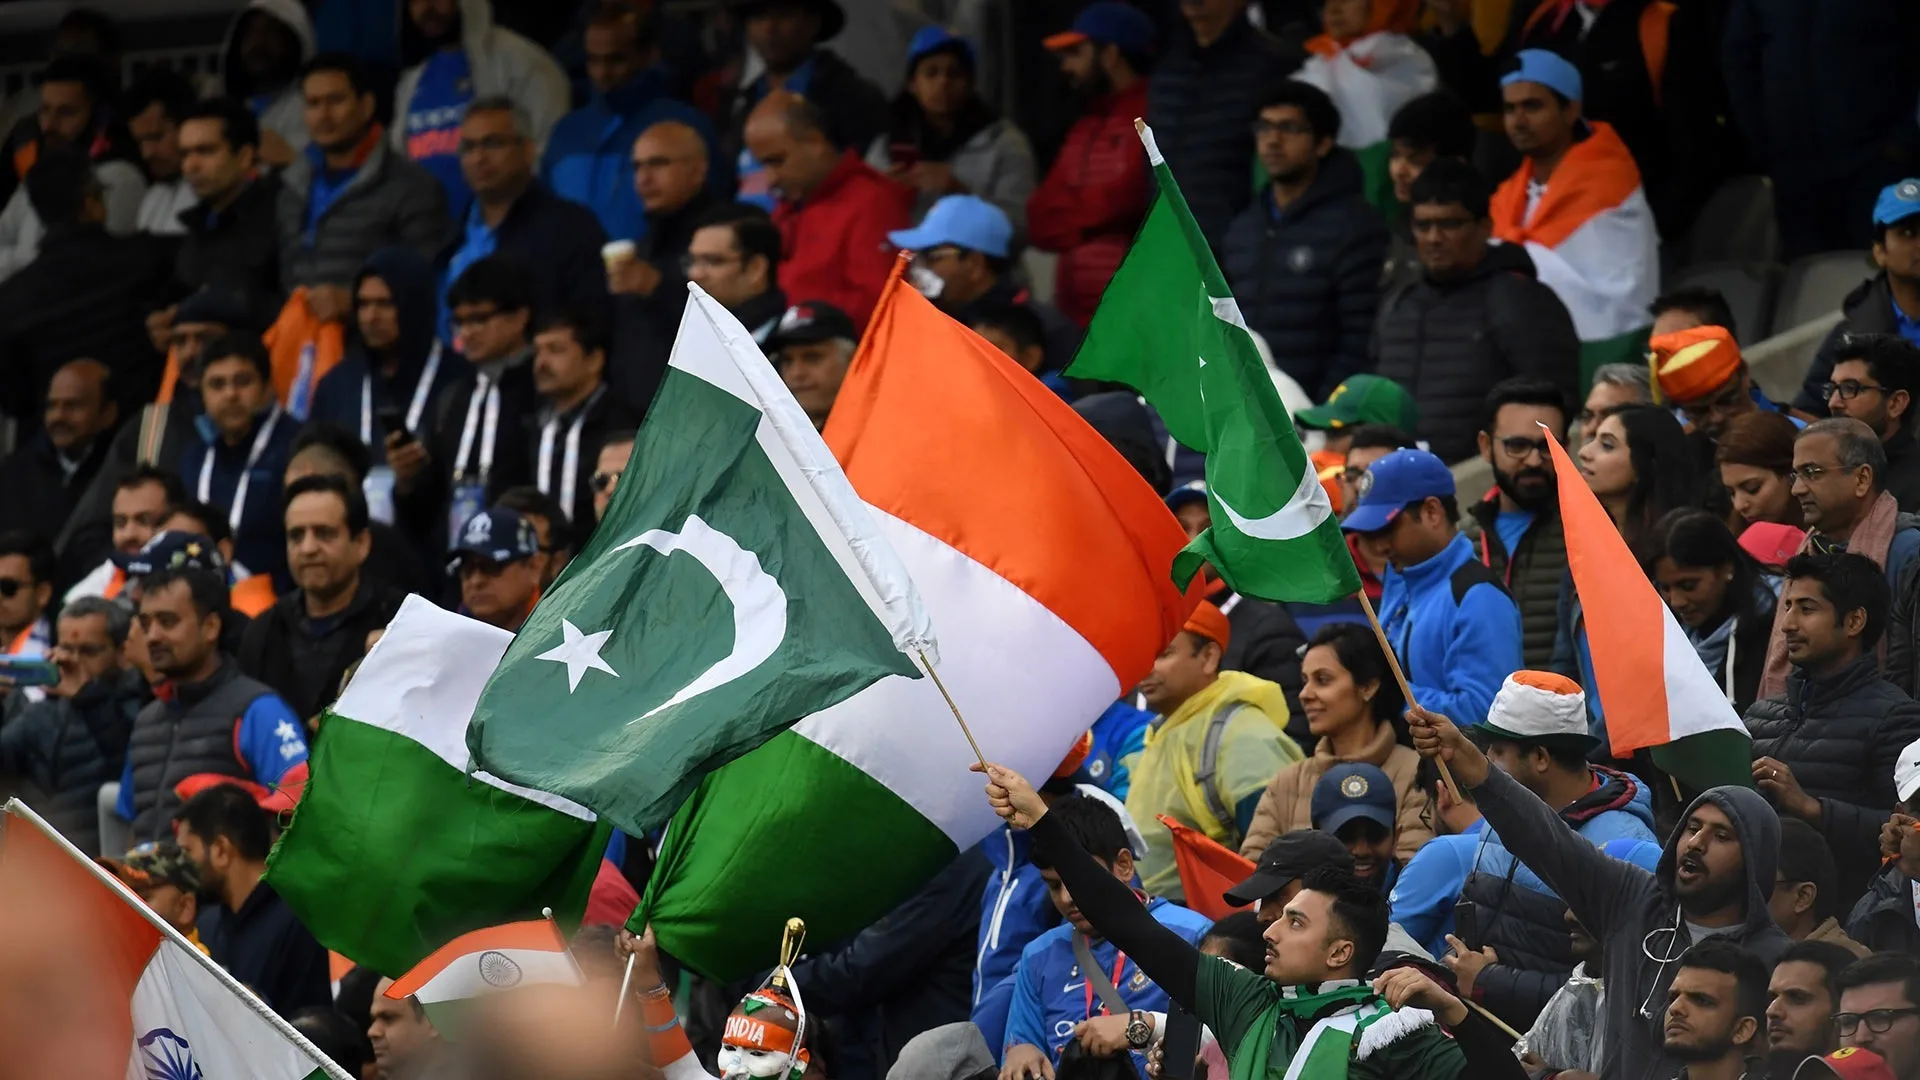 India’s elimination news spread like a wildfire. Twitter was flooded with memes as Pakistani cricket fans initiated a faceoff with Indians.